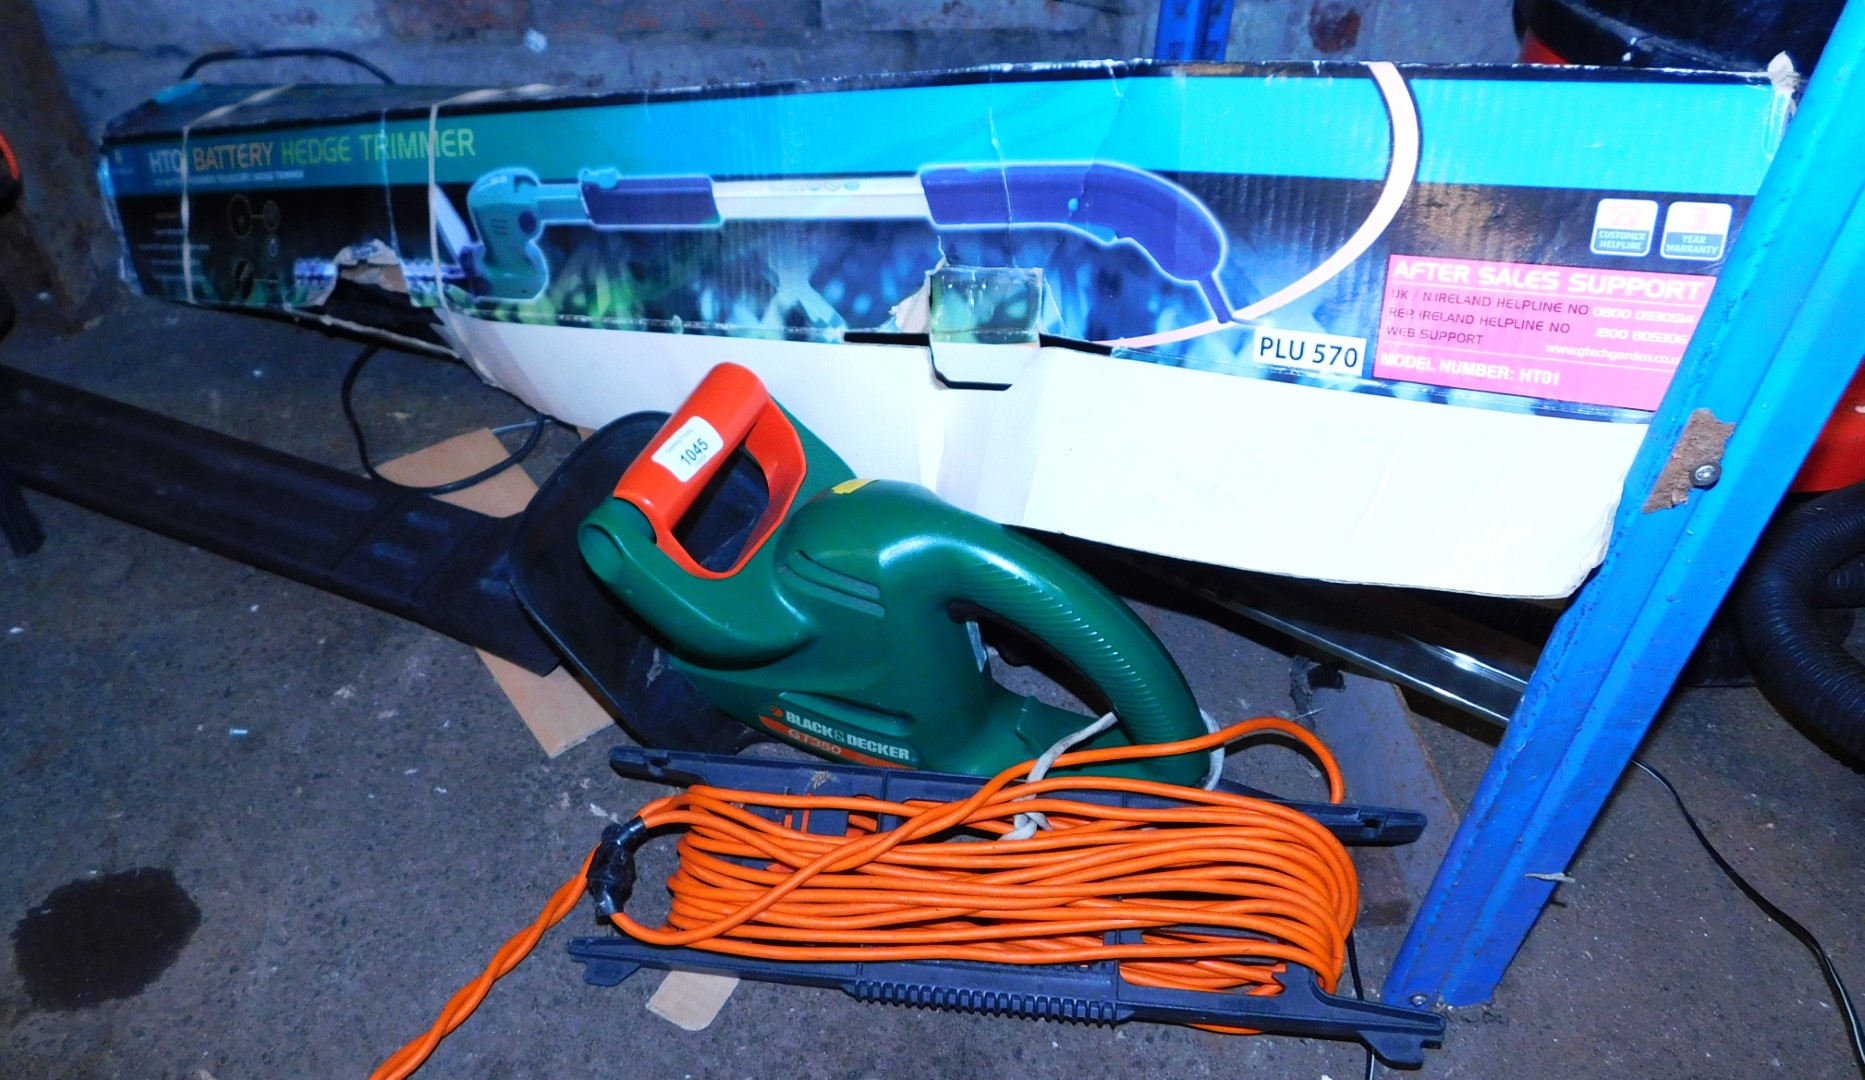 A Black and Decker GT350 hedge trimmer.